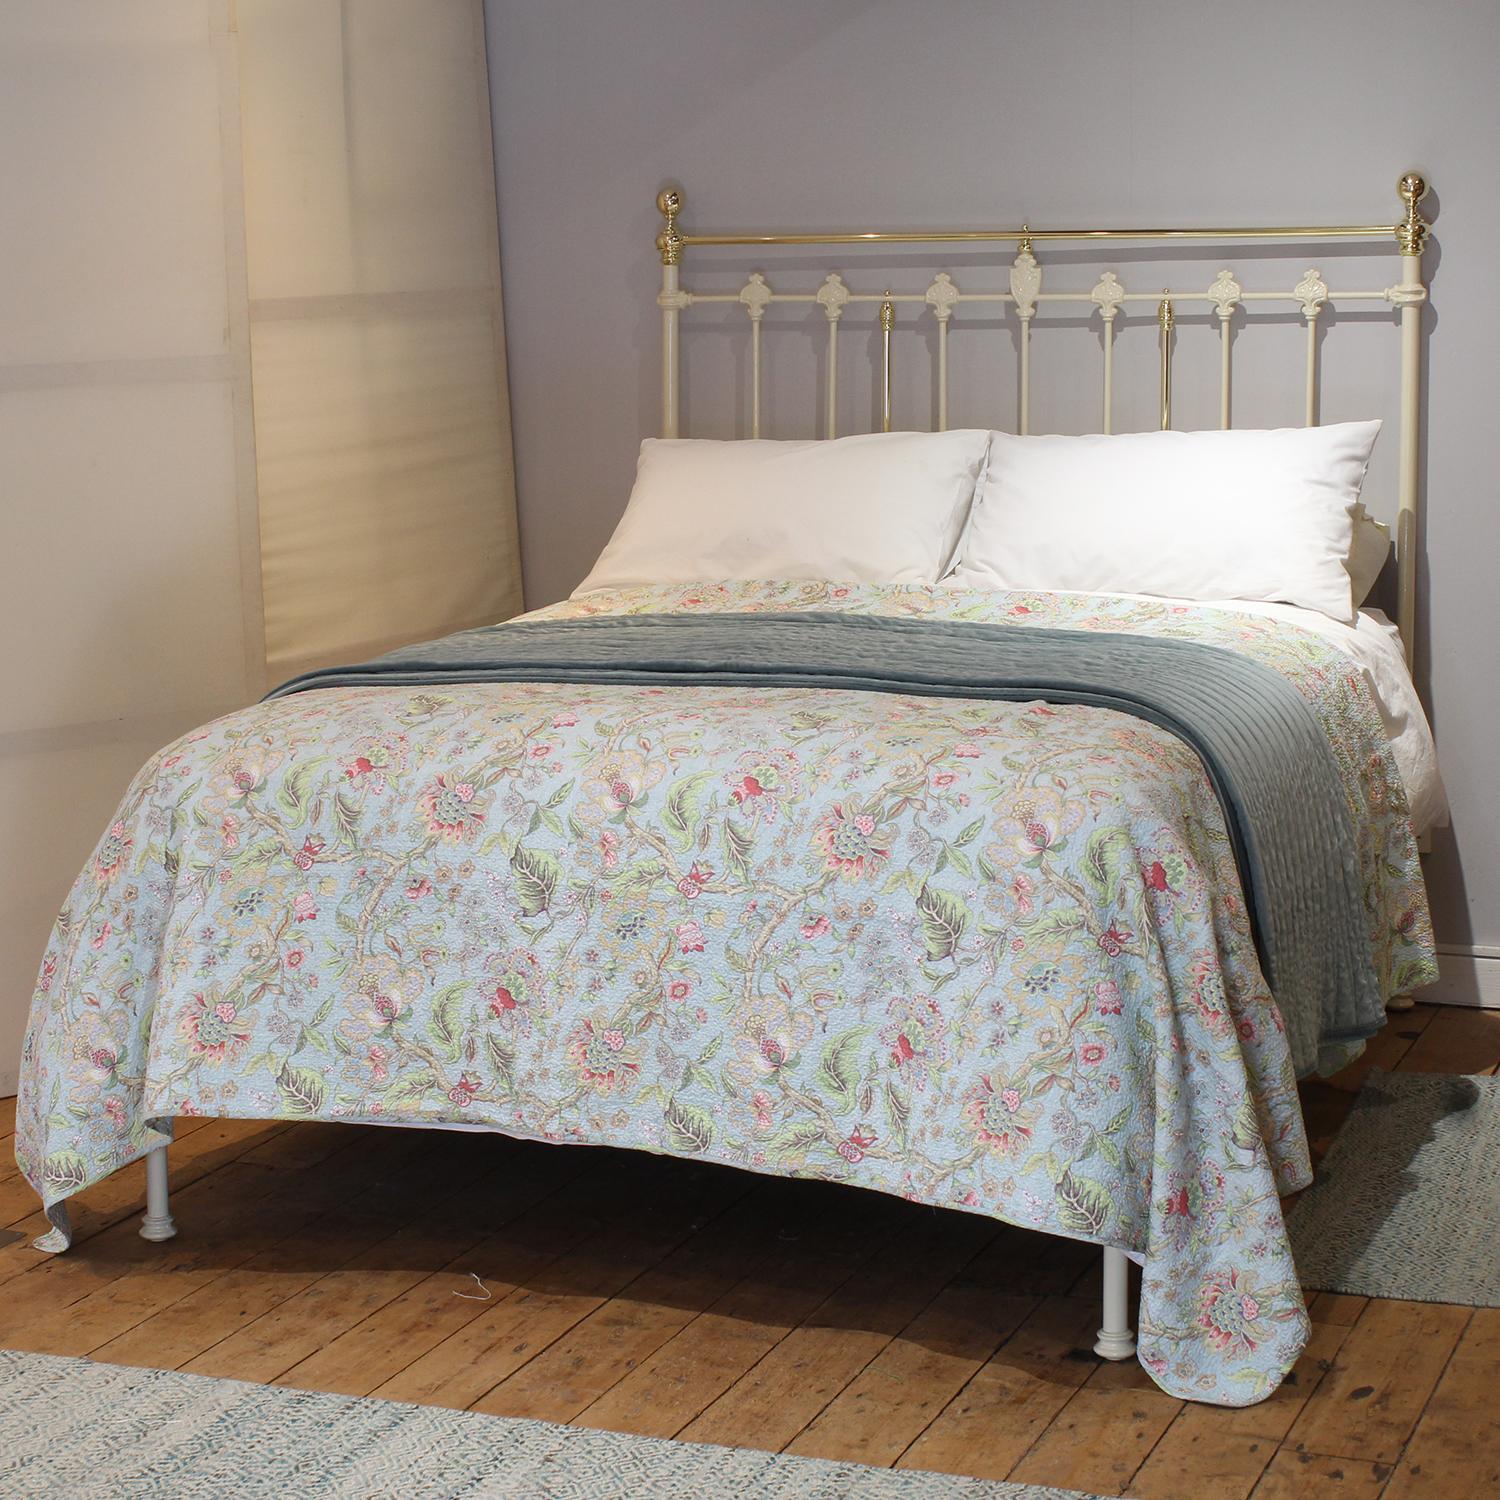 An attractive cast iron Victorian antique platform bed with low foot end, finished in cream with brass decoration.

This bed accepts a UK king size or US queen size (5ft, 60in or 150cm wide) base and mattress set.

The price includes a standard firm